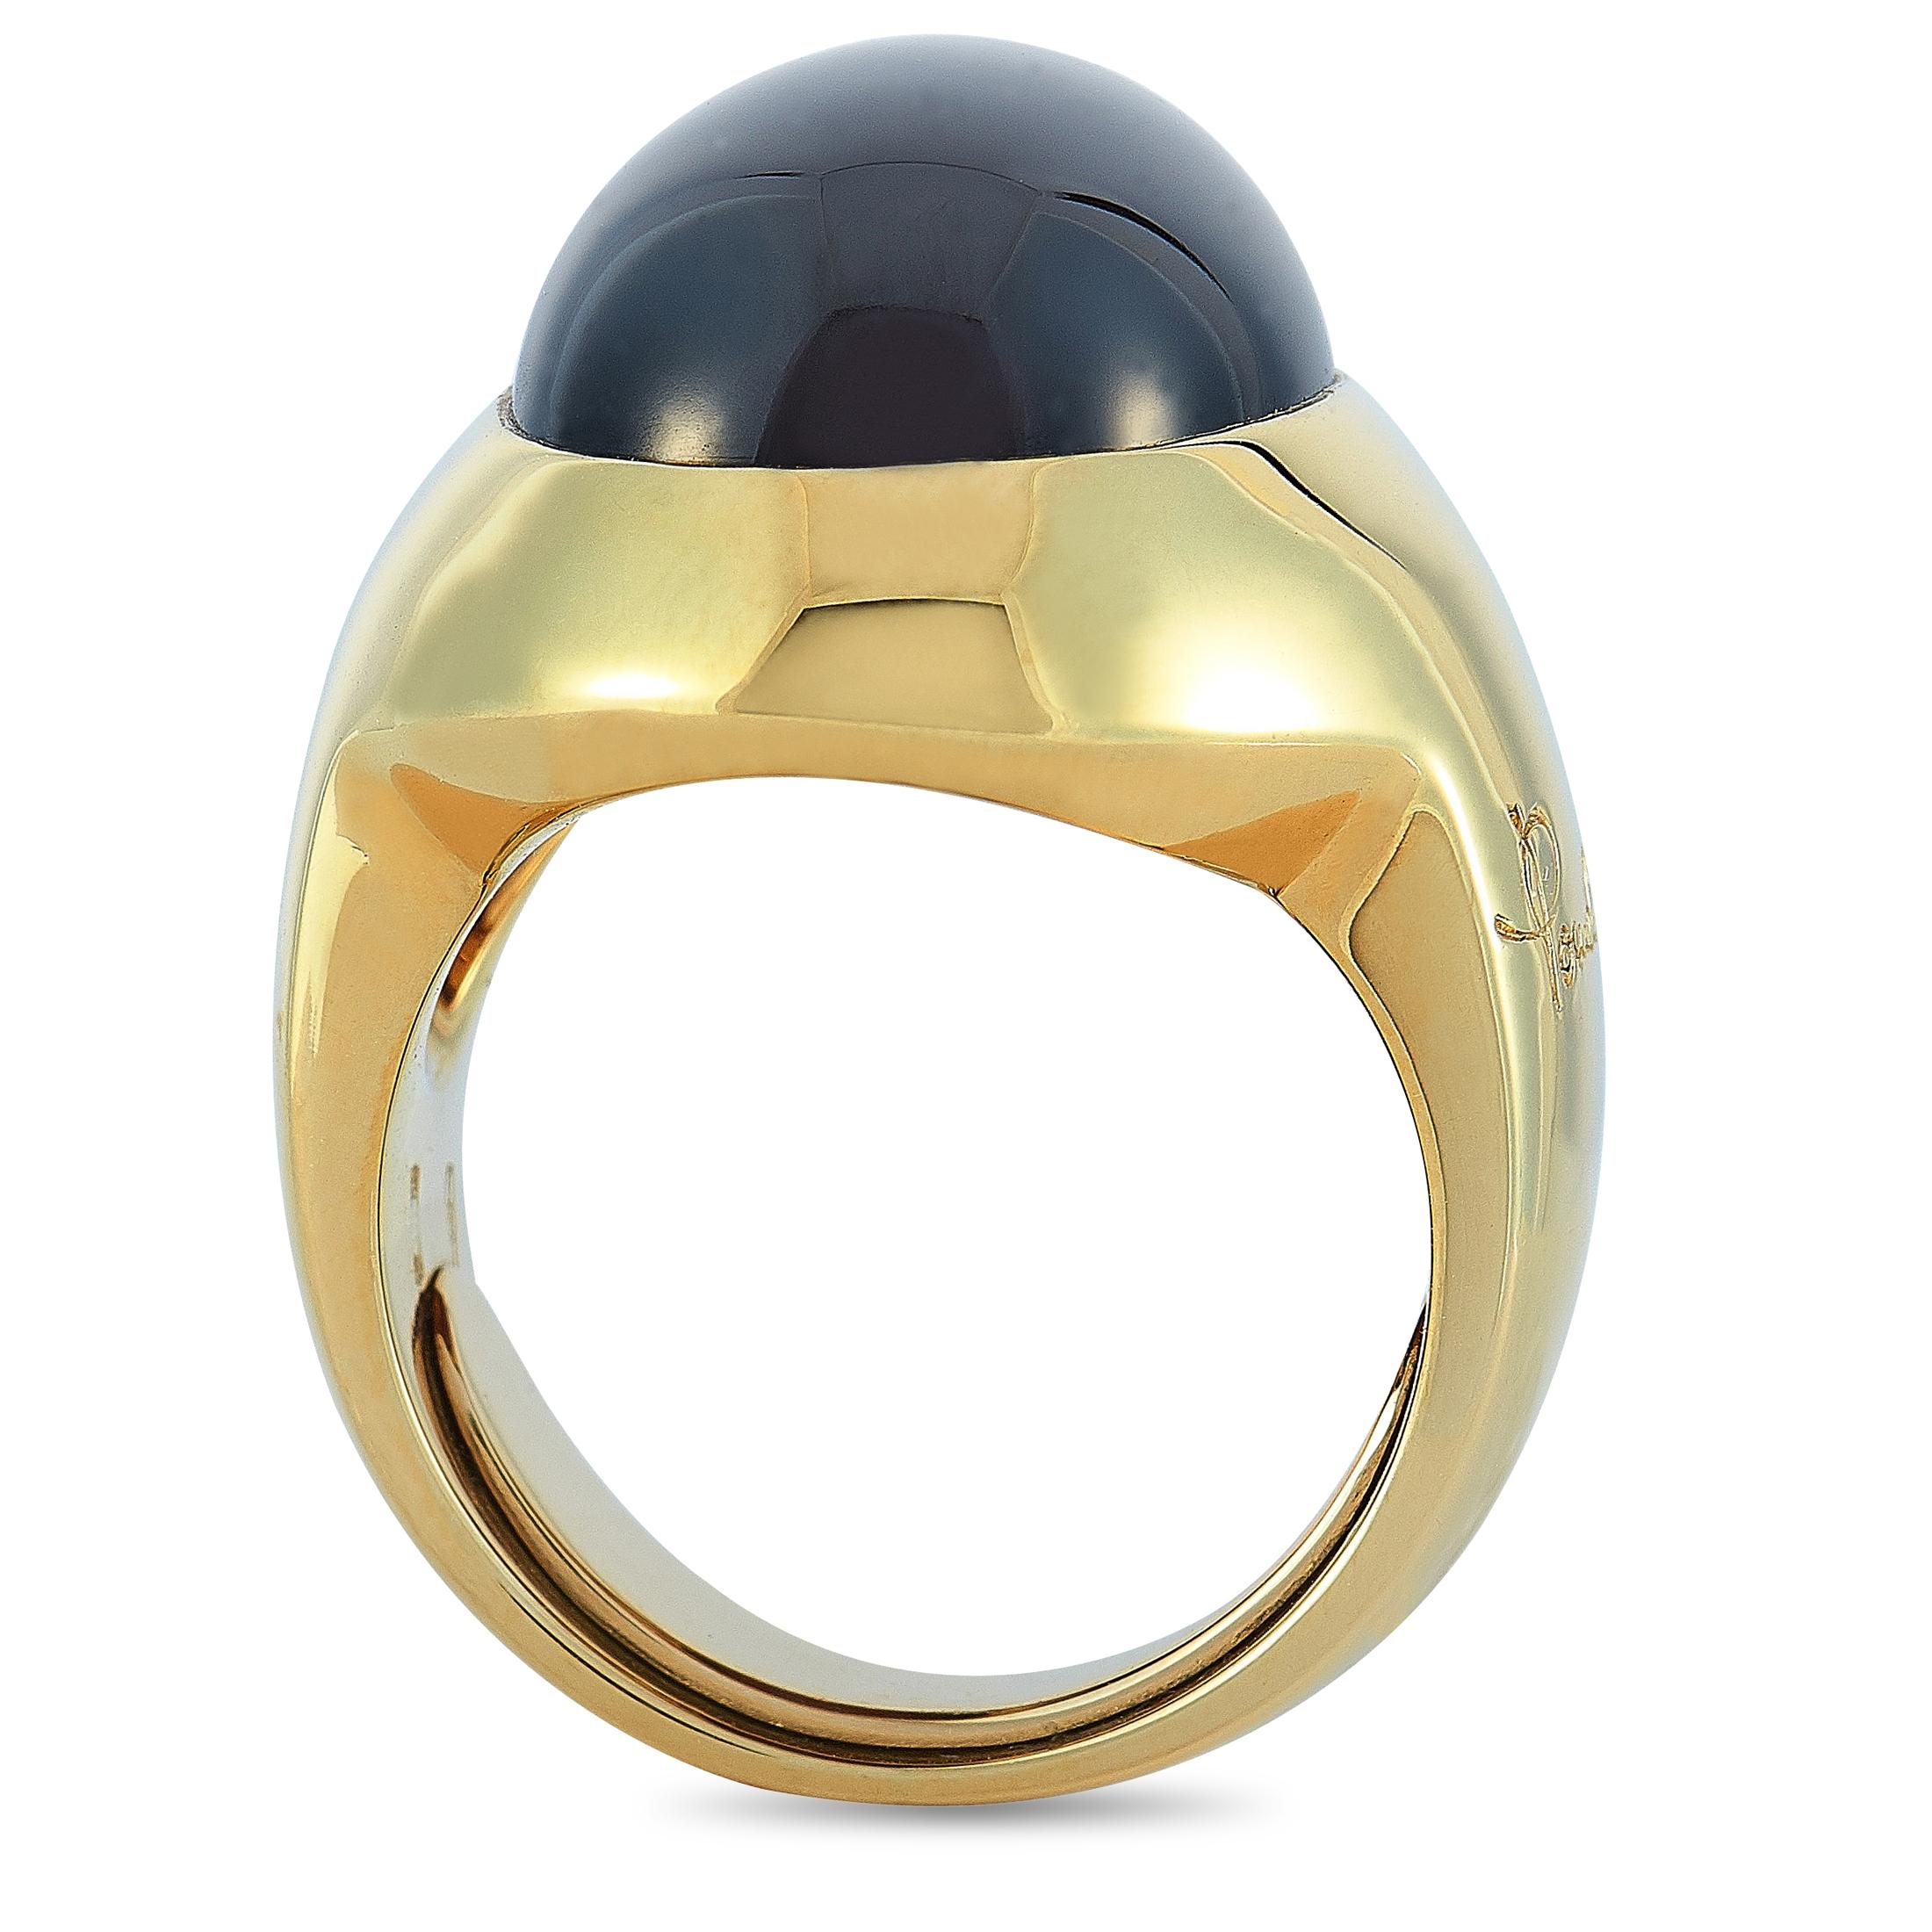 This Pomellato ring is crafted from 18K yellow gold and set with a garnet. The ring weighs 20.2 grams and boasts band thickness of 6 mm and top height of 10 mm, while top dimensions measure 14 by 18 mm.
 
 Offered in estate condition, this jewelry